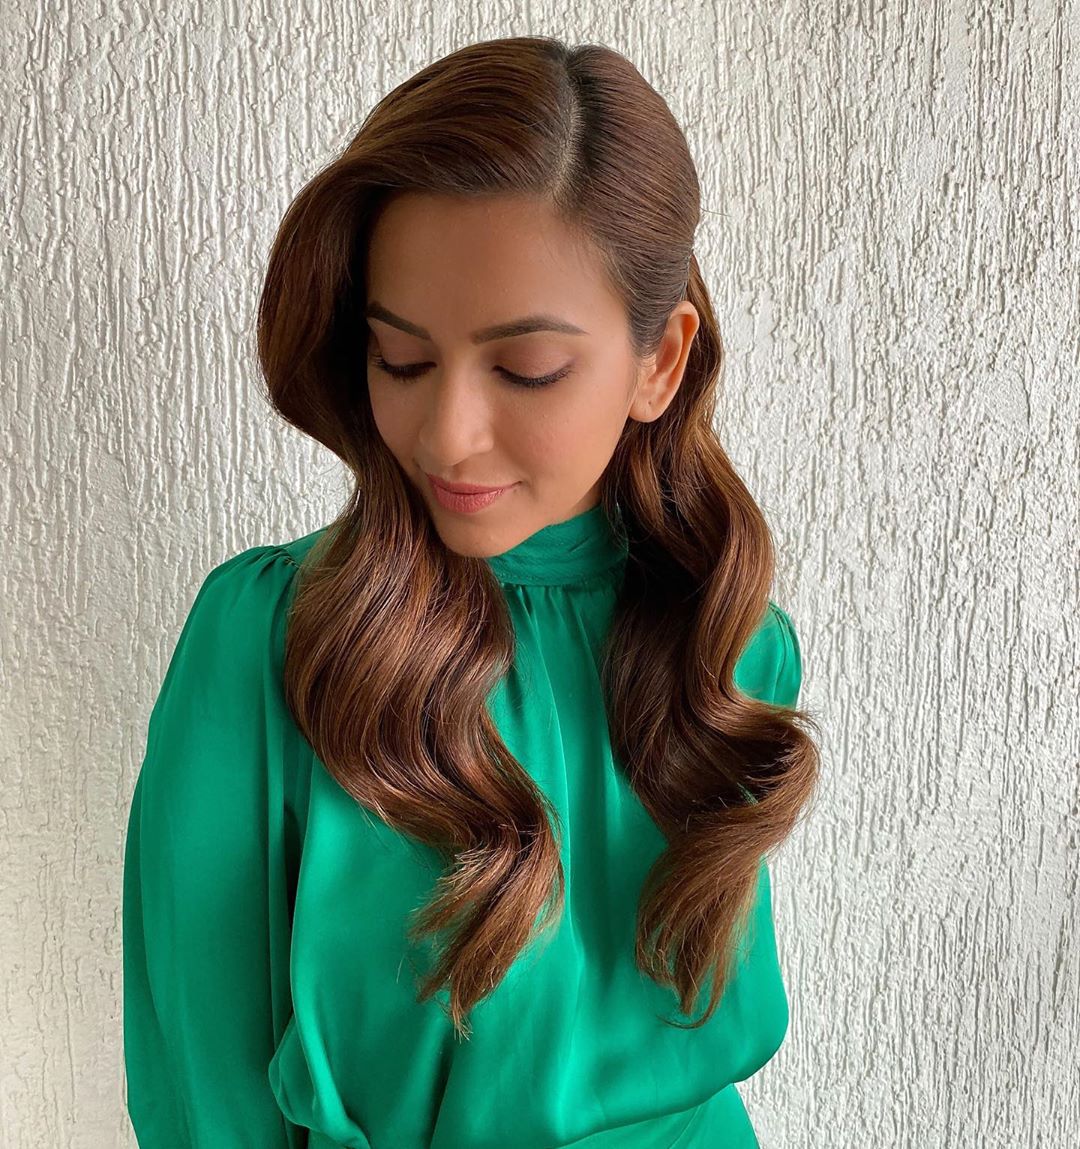 Kriti Kharbanda Goes Green With Her Latest Pictures The Indian Wire